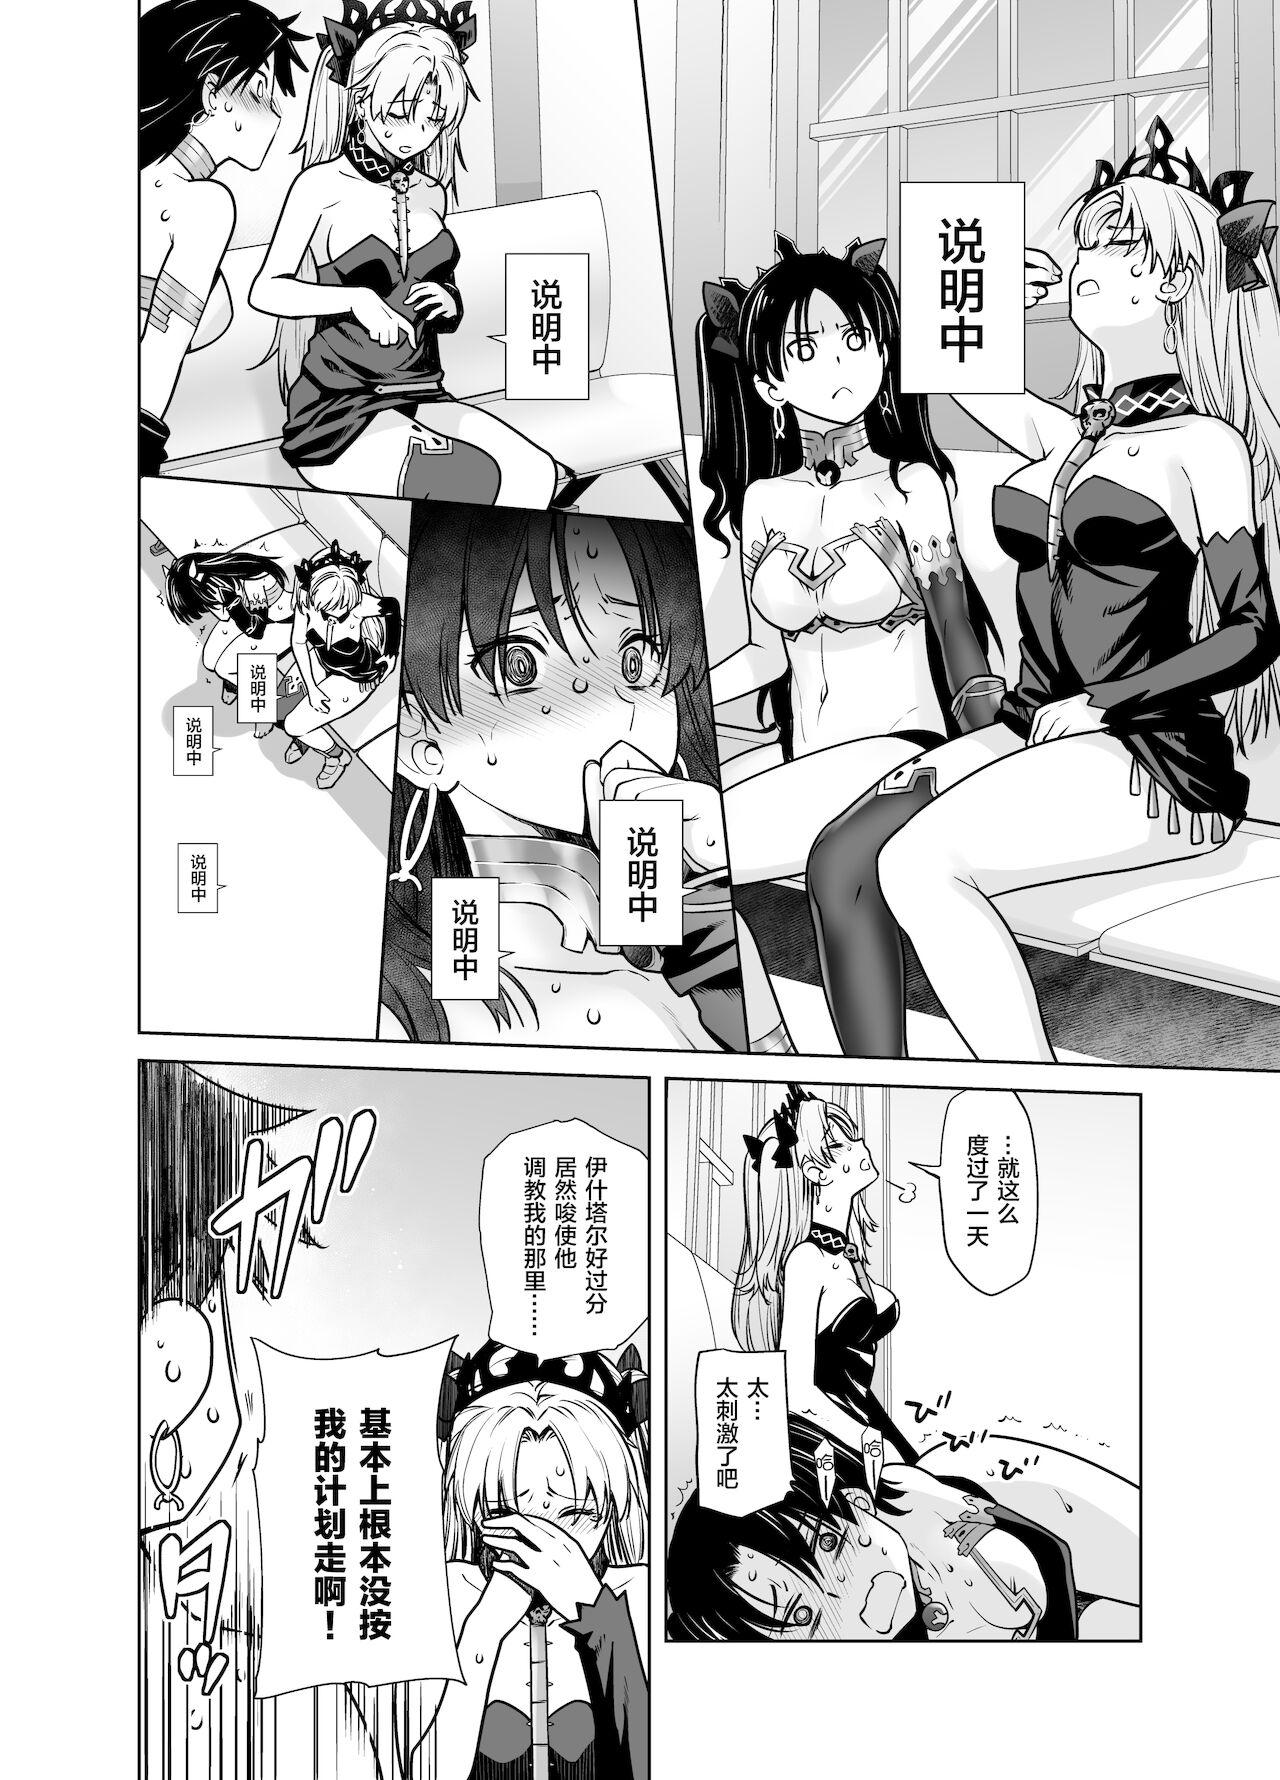 Spying HEAVEN'S DRIVE 10 - Fate grand order Girl On Girl - Page 8